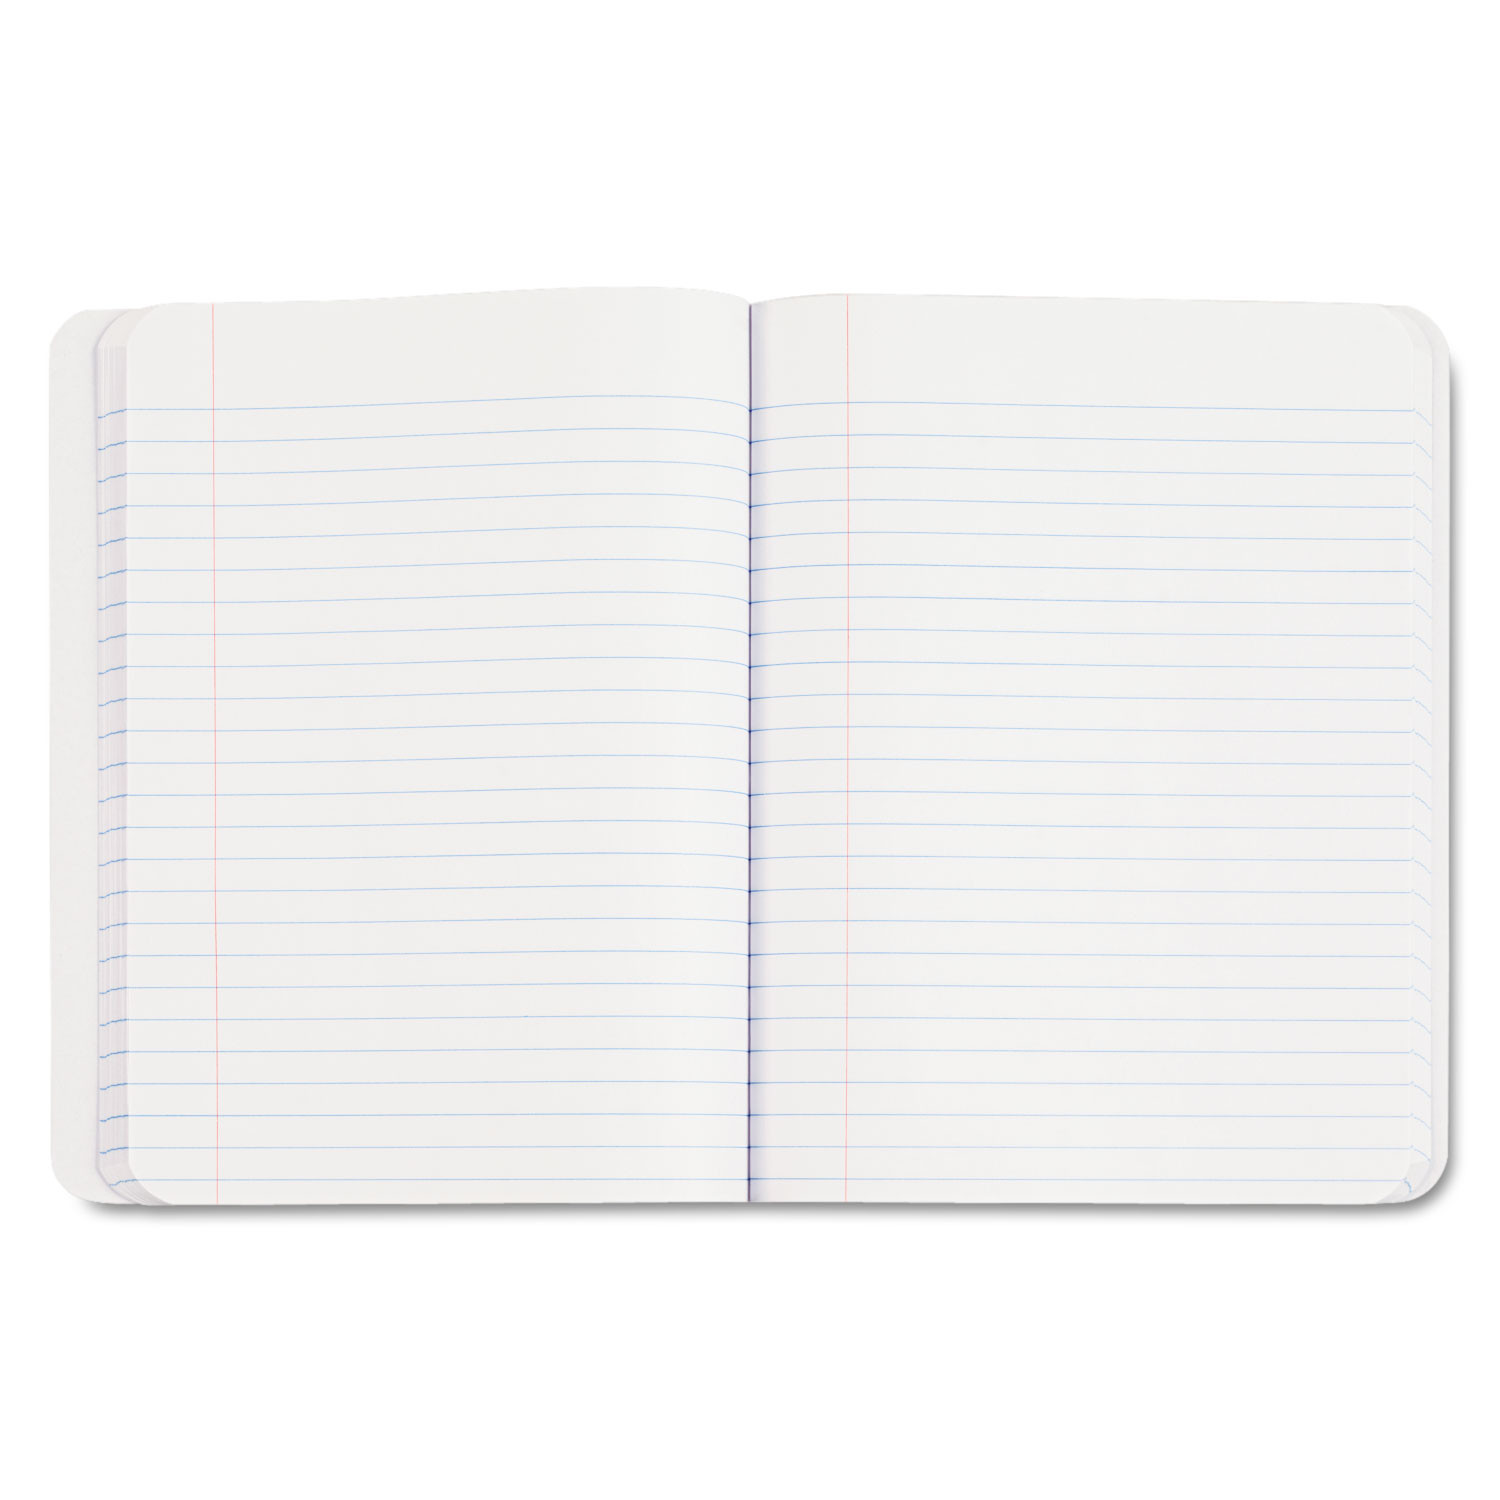 Composition Book w/Hard Cover, Legal/Wide, 9 3/4 x 7 1/2, White, 100 Sheets